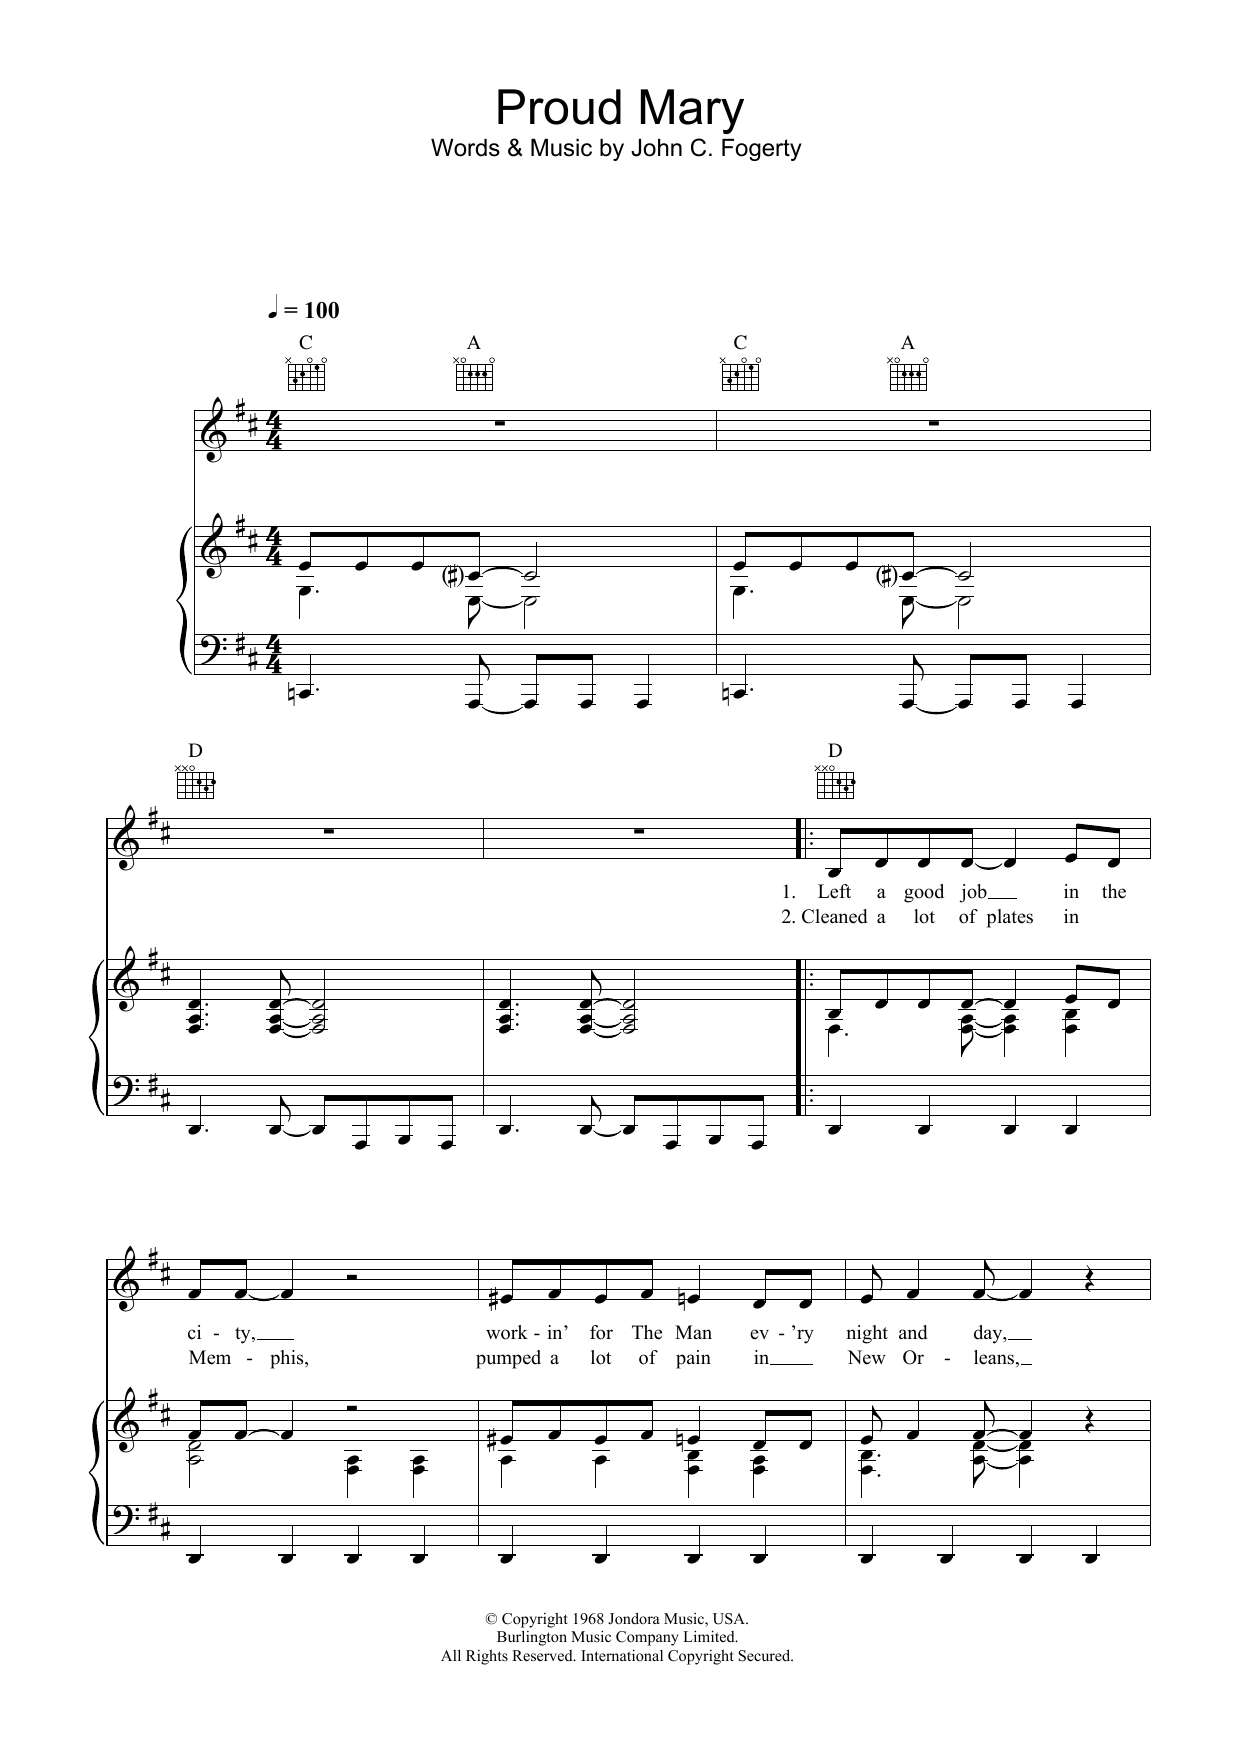 Creedence Clearwater Revival Proud Mary sheet music notes printable PDF score